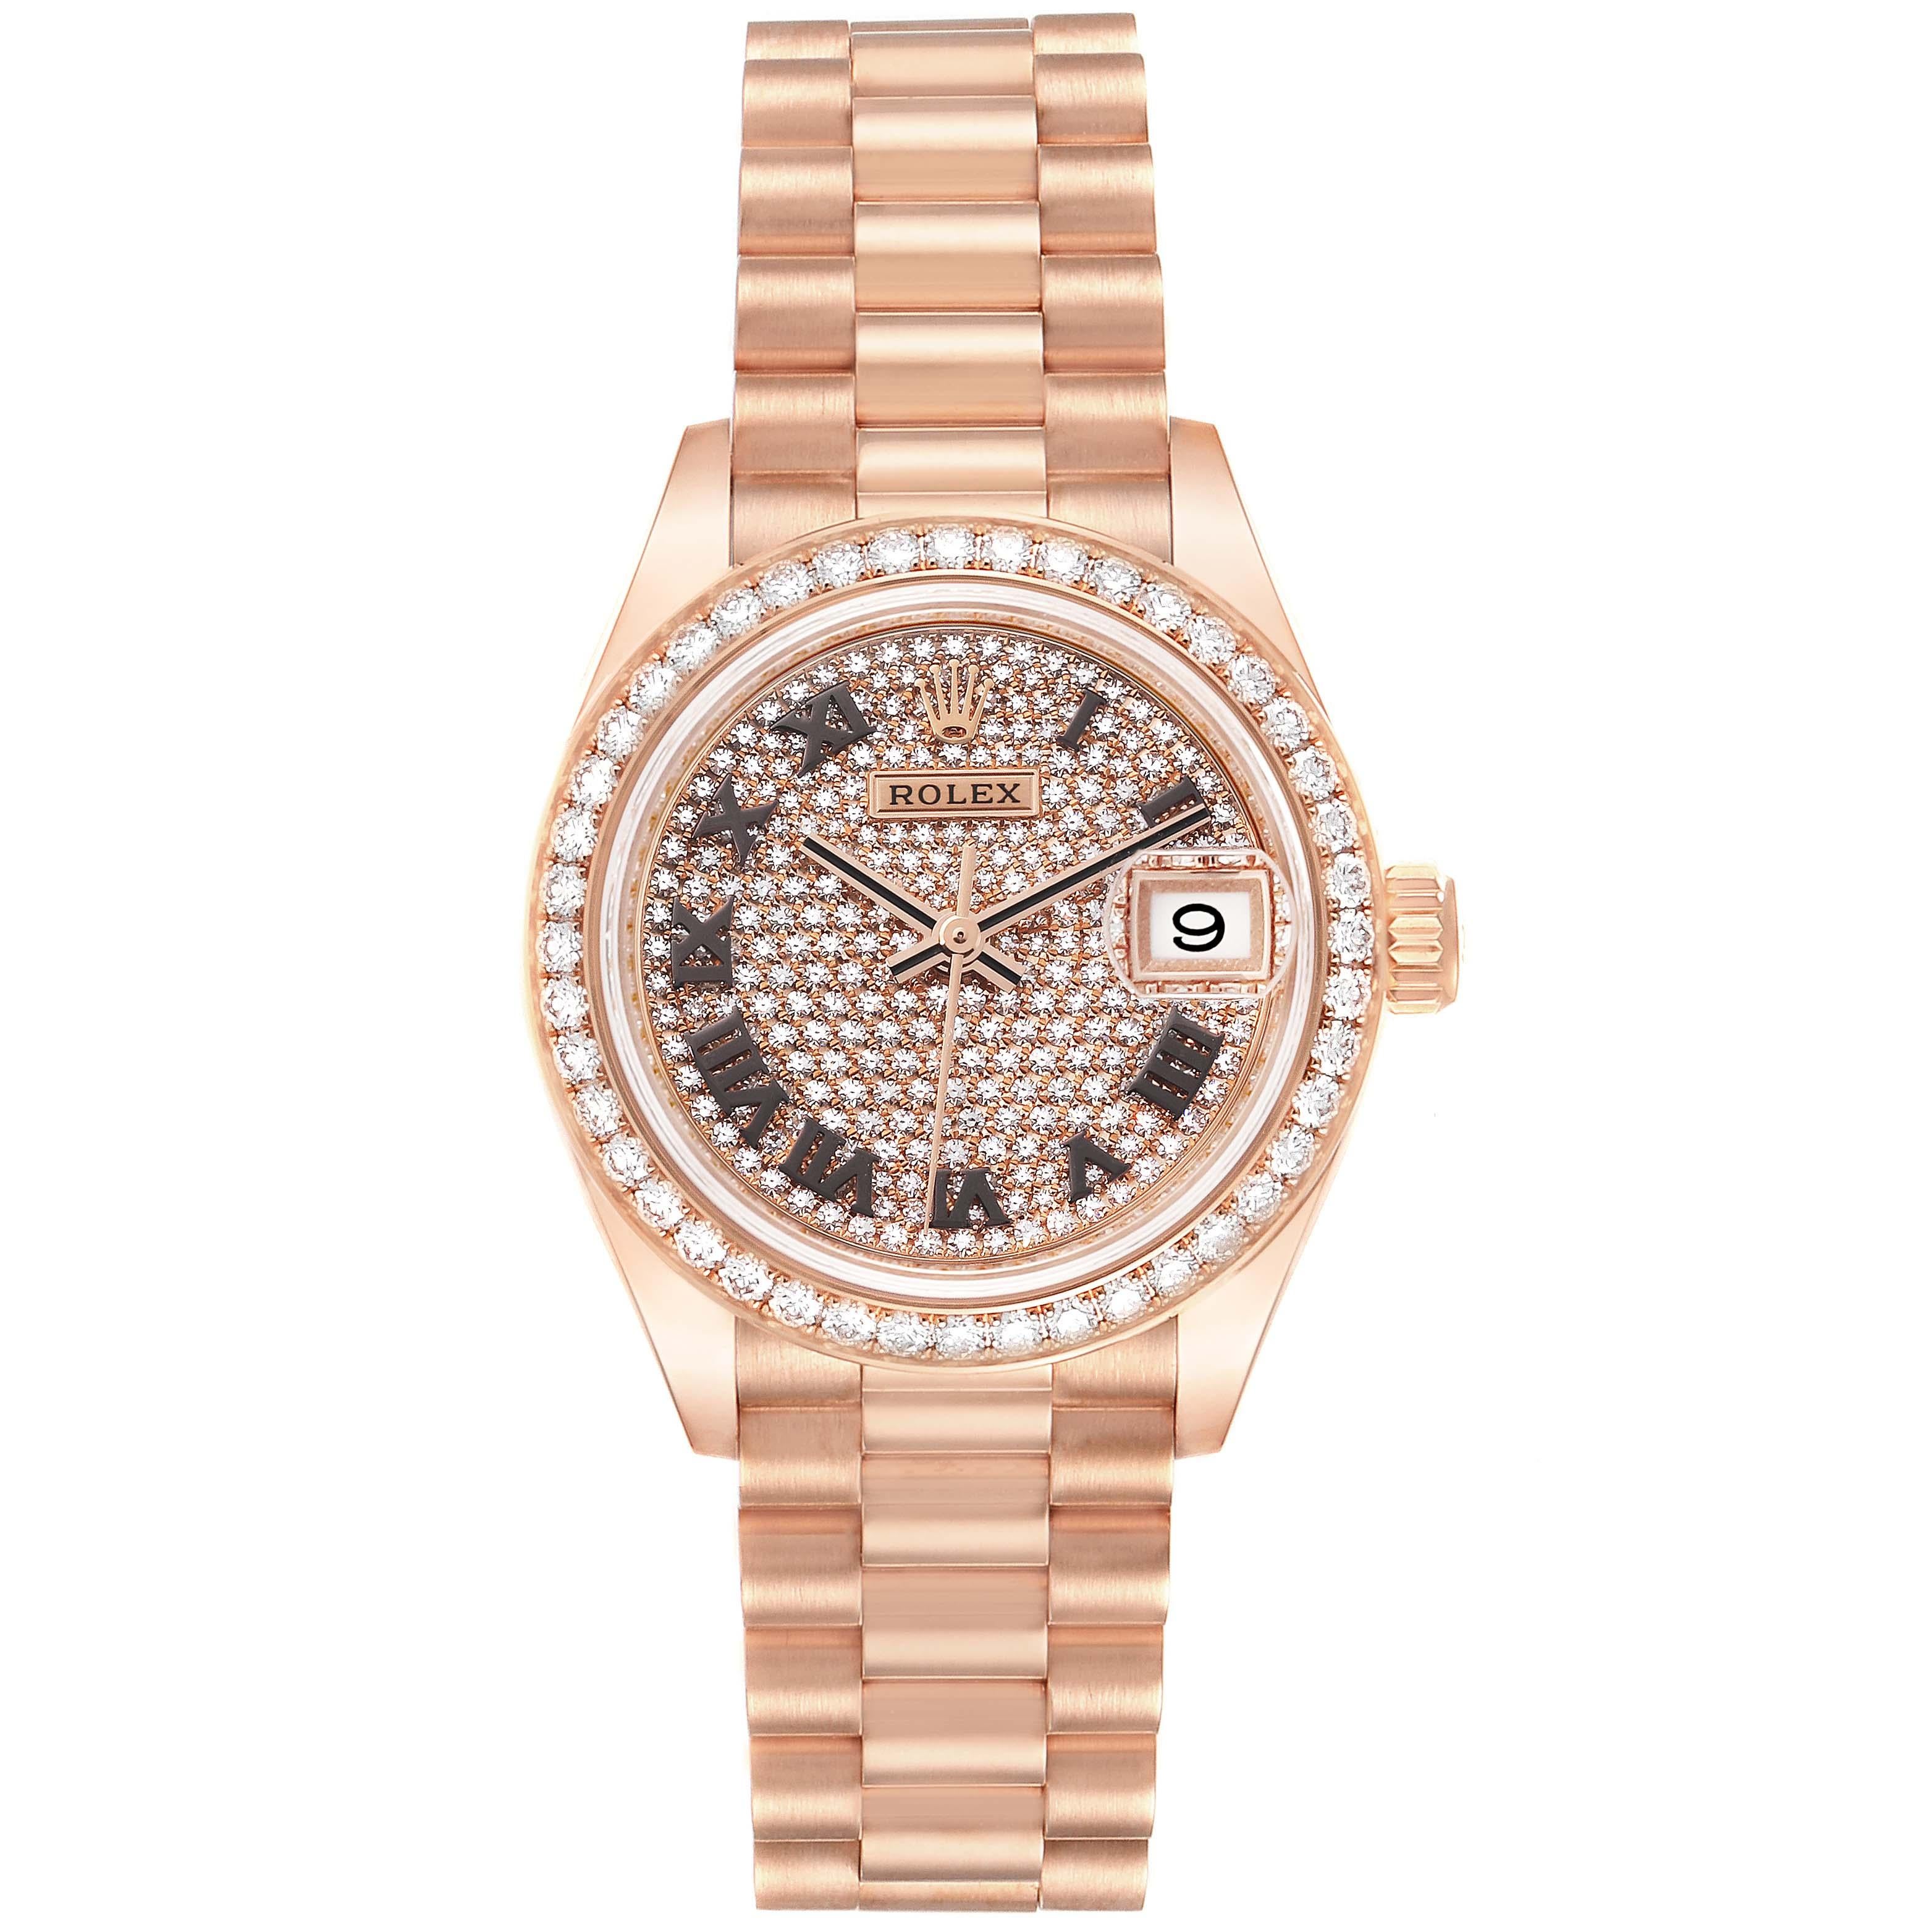 Rolex President 28 Rose Gold Pave Diamond Dial Ladies Watch 279135. Officially certified chronometer automatic self-winding movement. 18k rose gold oyster case 28.0 mm in diameter. Rolex logo on a crown. 18k rose gold original Rolex factory diamond